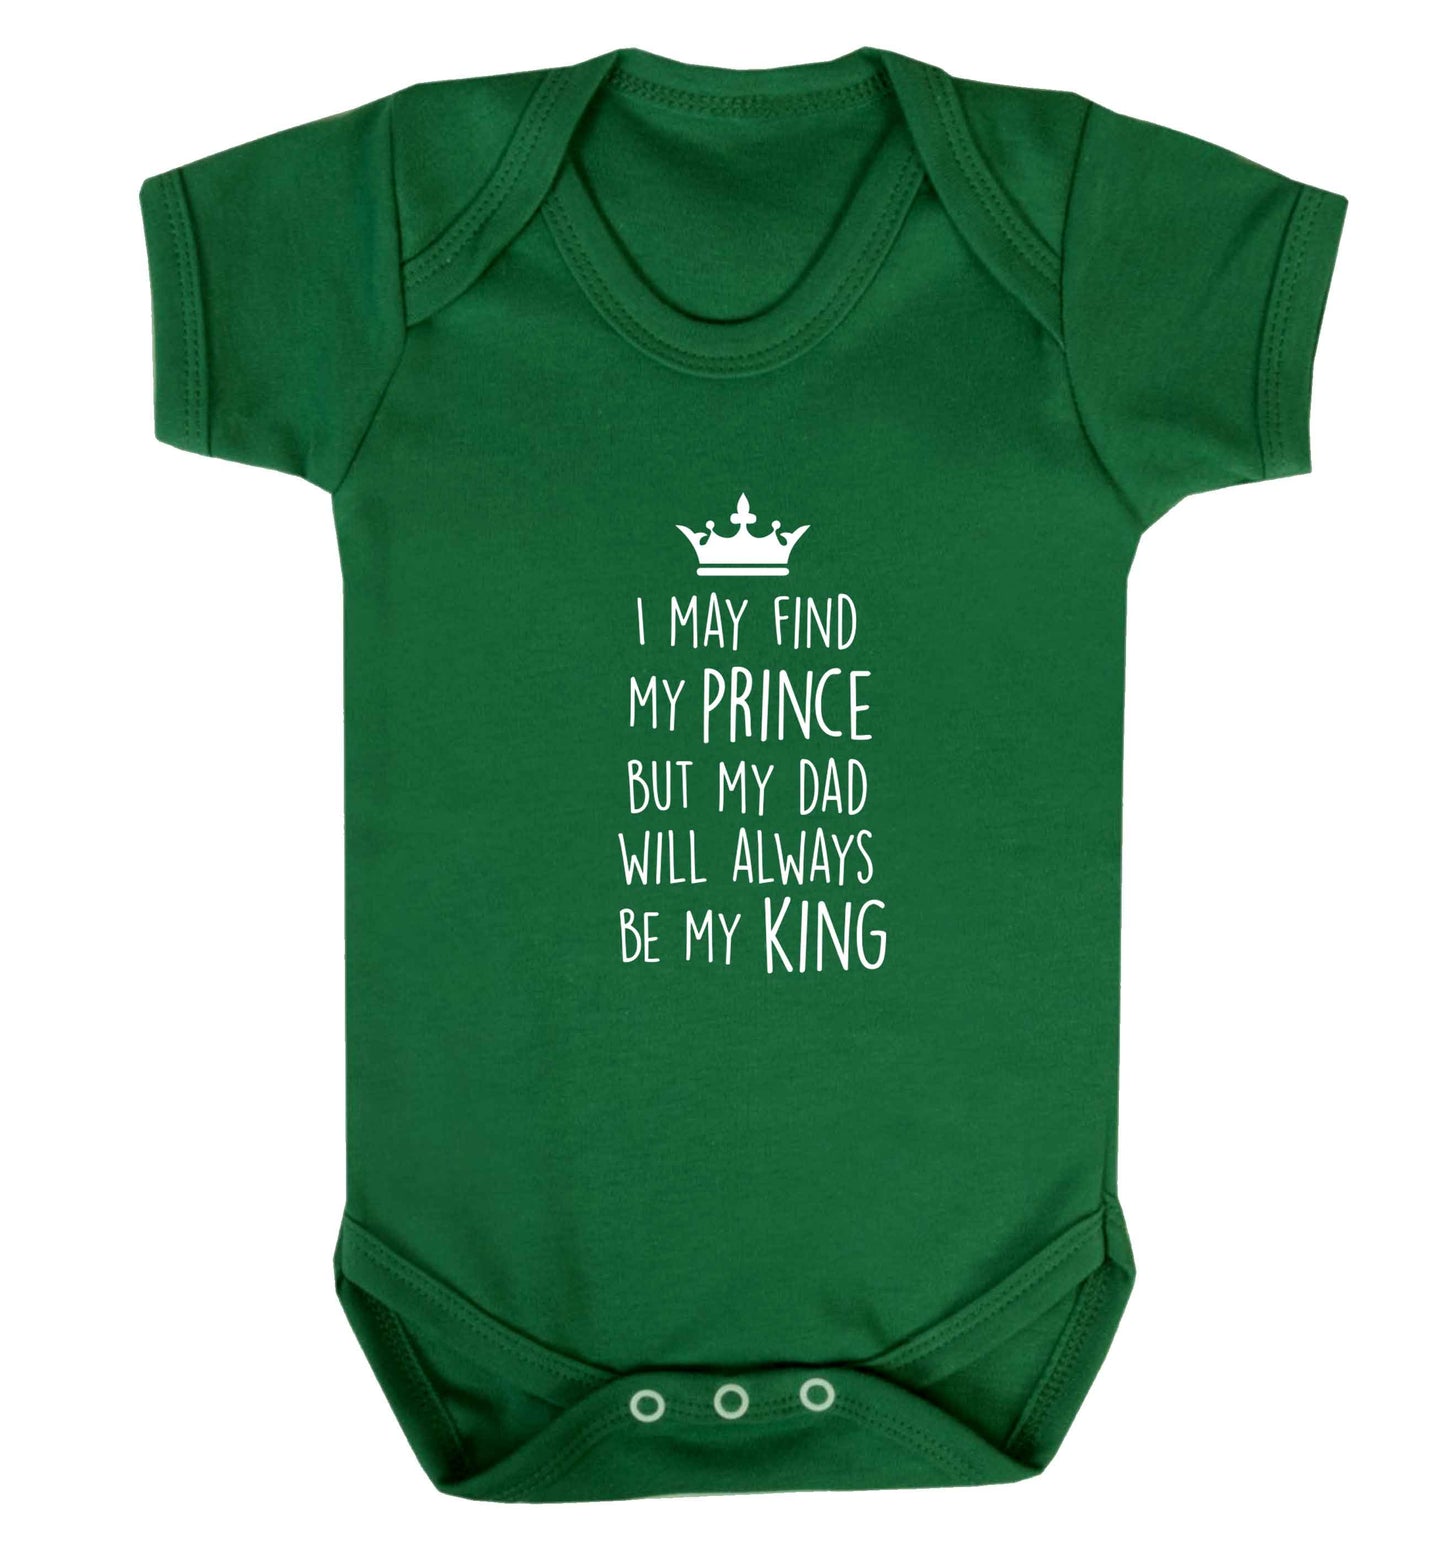 I may find my prince but my dad will always be my king baby vest green 18-24 months